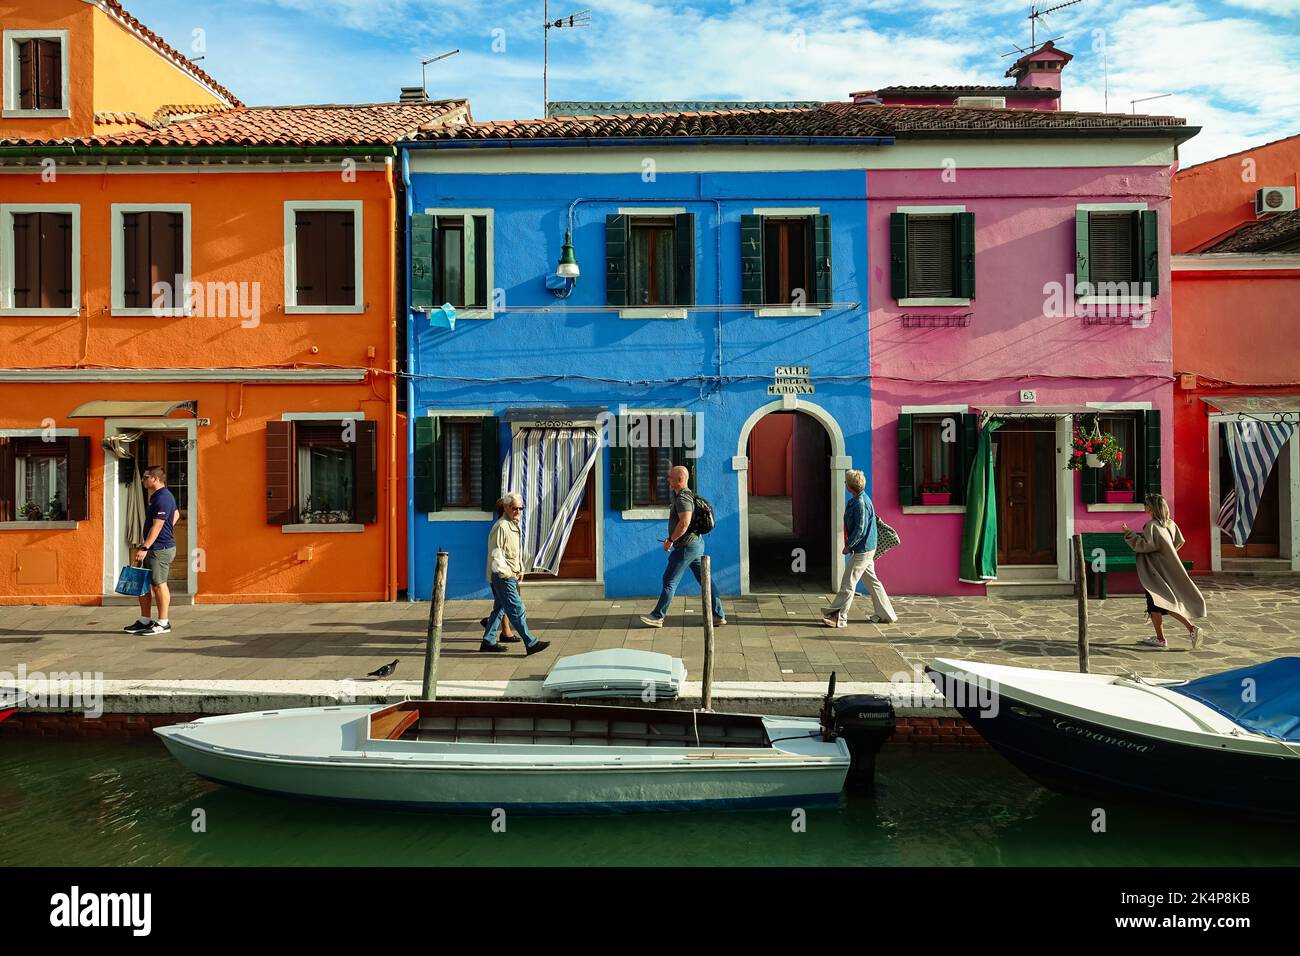 The island of Burano. Burano is one of the islands of Venice, famous for its colorful houses. Burano, Venice - October 2022 Stock Photo